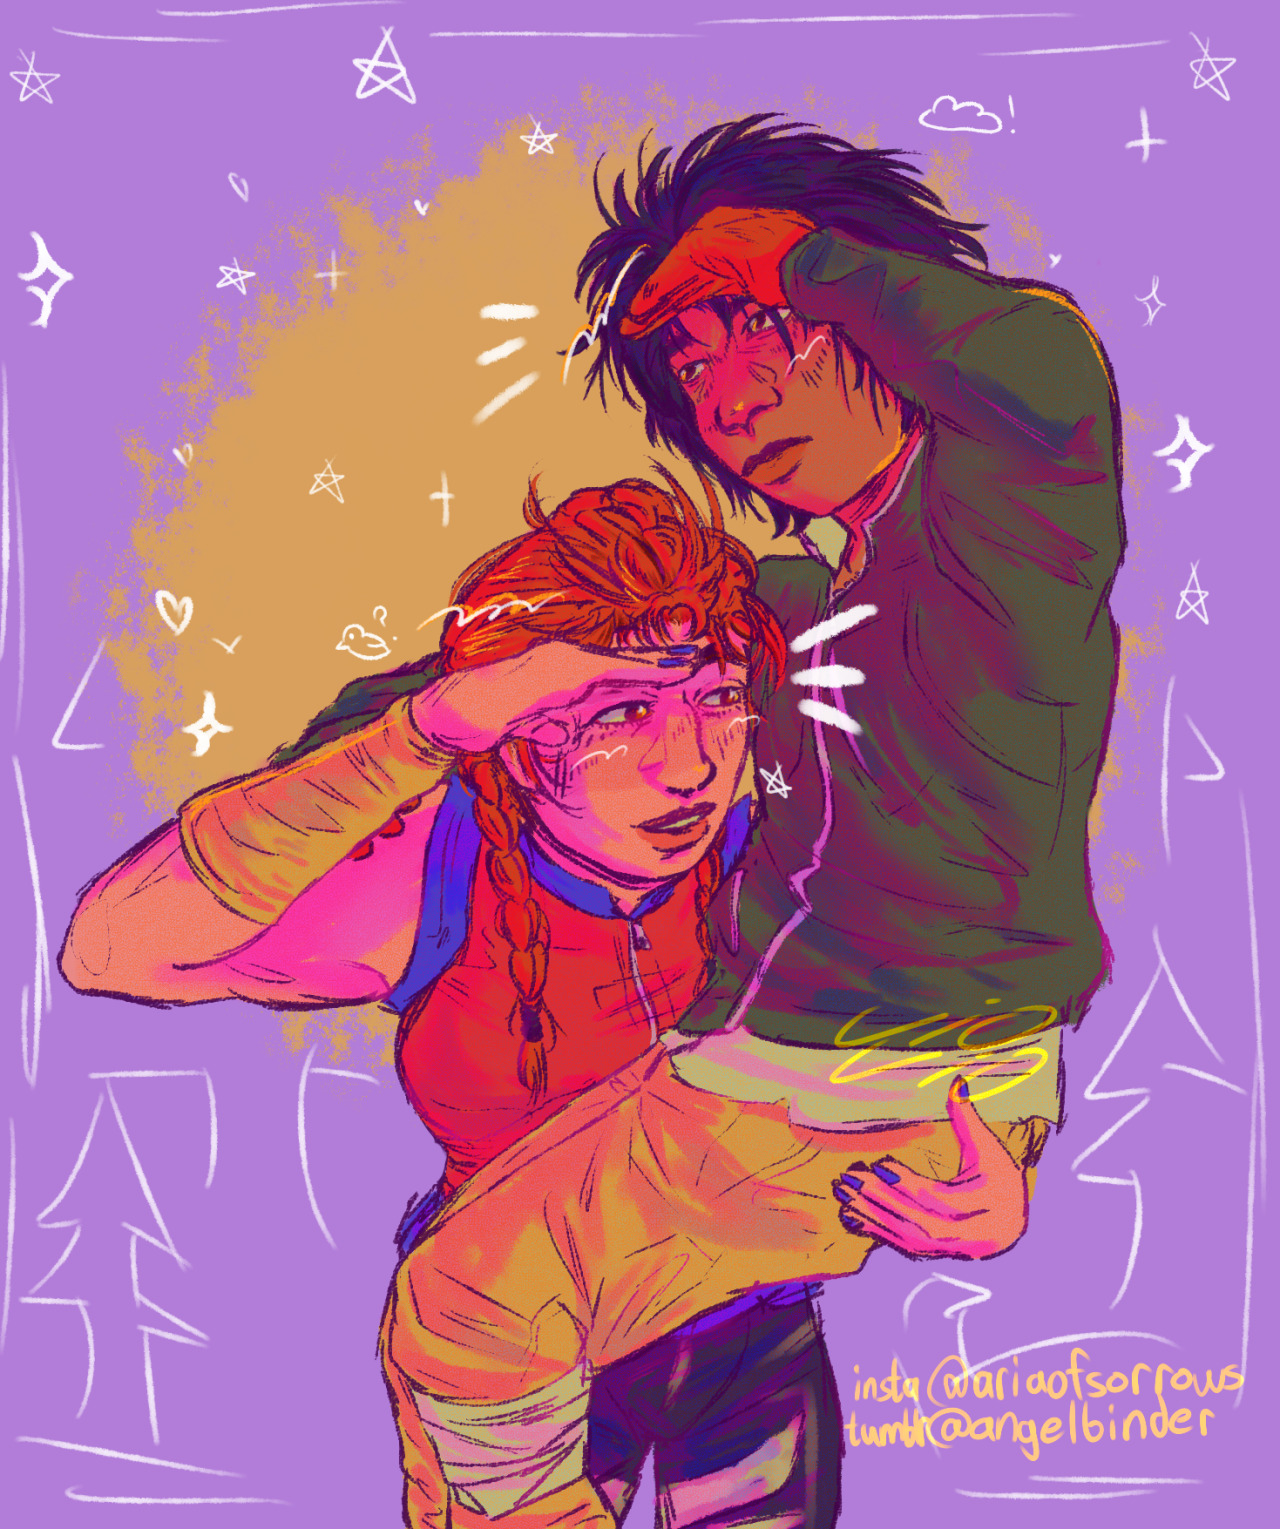 jake being 5′8 doesnt mean you couldnt scoop him up and spin him around. to ms thomas at least #dead by daylight #jake park#meg thomas#dbd#megjake#jakemeg #idk what their ship name is.. #my art#op #artists on tumblr #illustration #DWIGHT could pick him up but only when in a scoobydoo-esque chase sequence and he goes ZOINKS grabs him and runs  #jake voice oh ok. pass by that cool rock i need to get a closer look  #CLAUDETTE THE MOST SCOOPABLE GIRL EVER wrap my arms around her waist and twirl her around